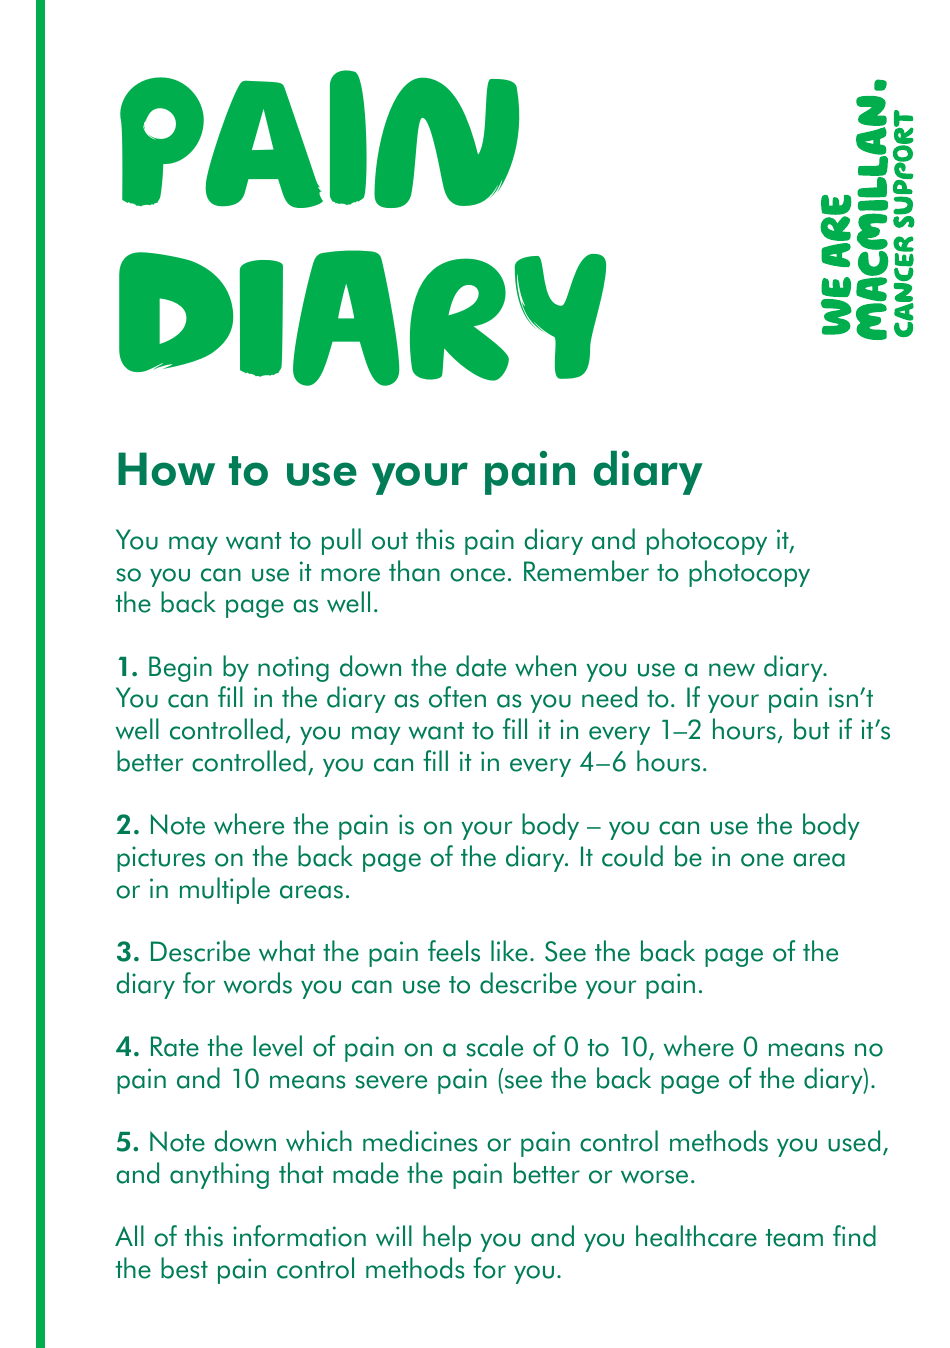 Pain Diary Template - Keep track of your pain symptoms